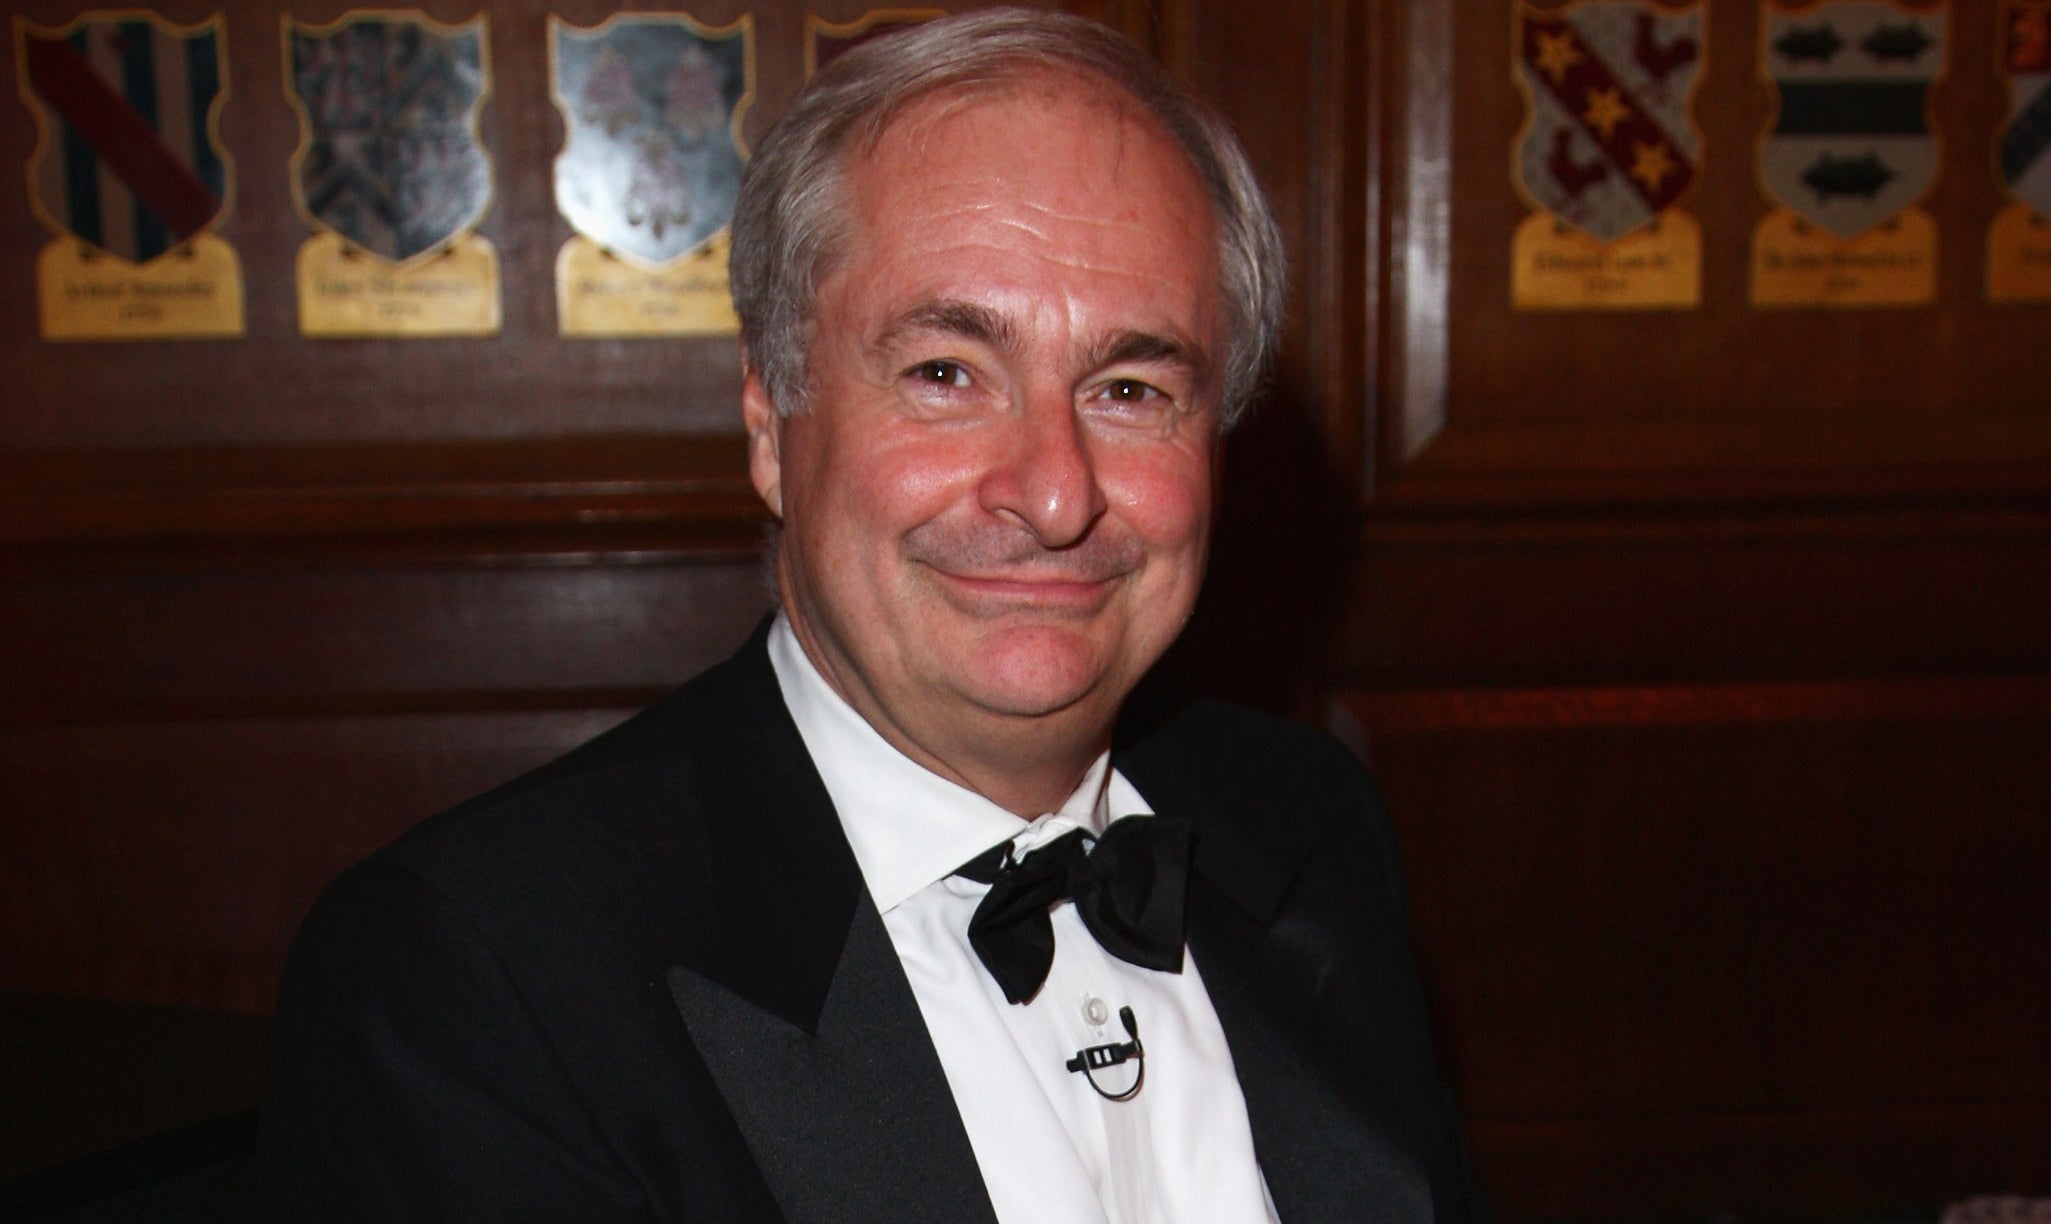 Radio host Paul Gambaccini will not face charges over alleged historic sex offences